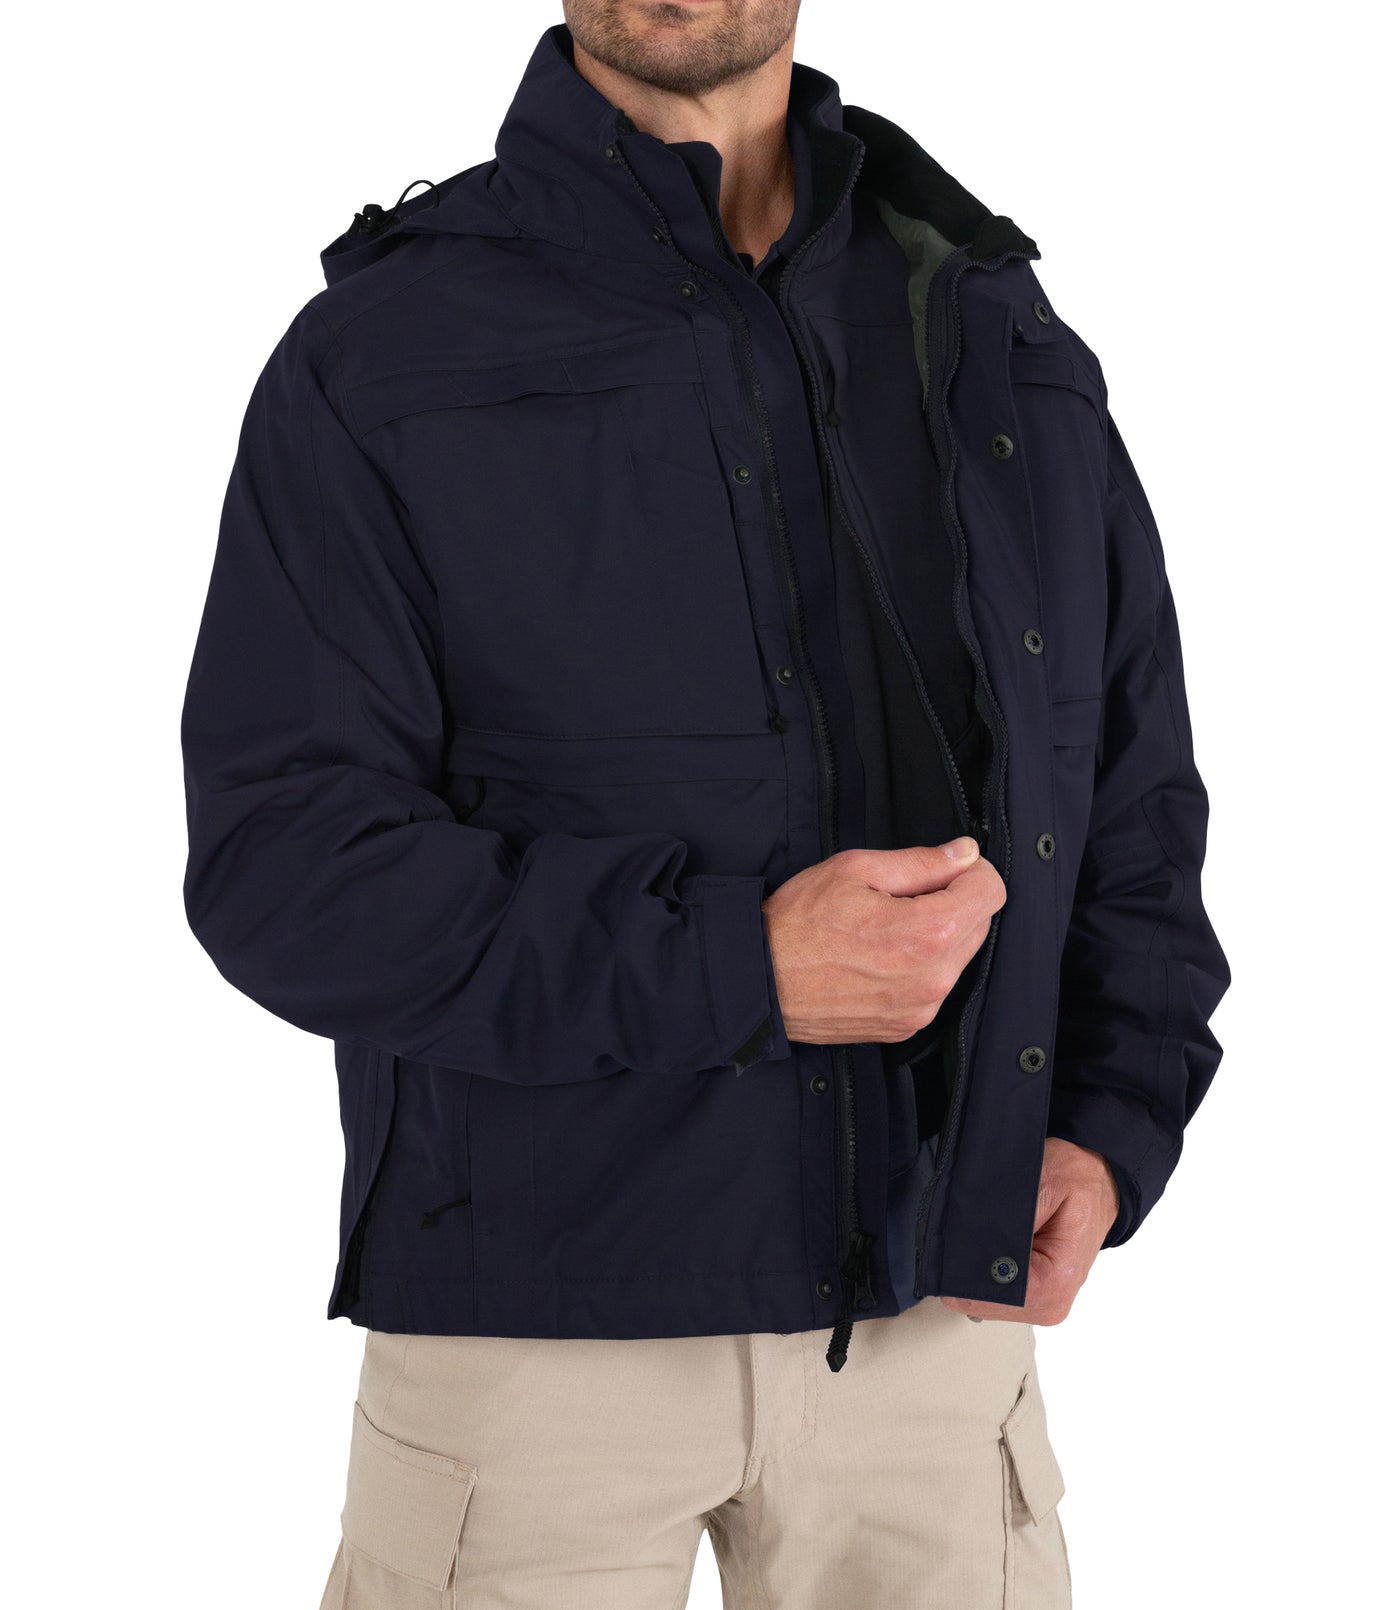 Softshell Jacket Unzipped for Men’s Tactix System Jacket in Midnight Navy